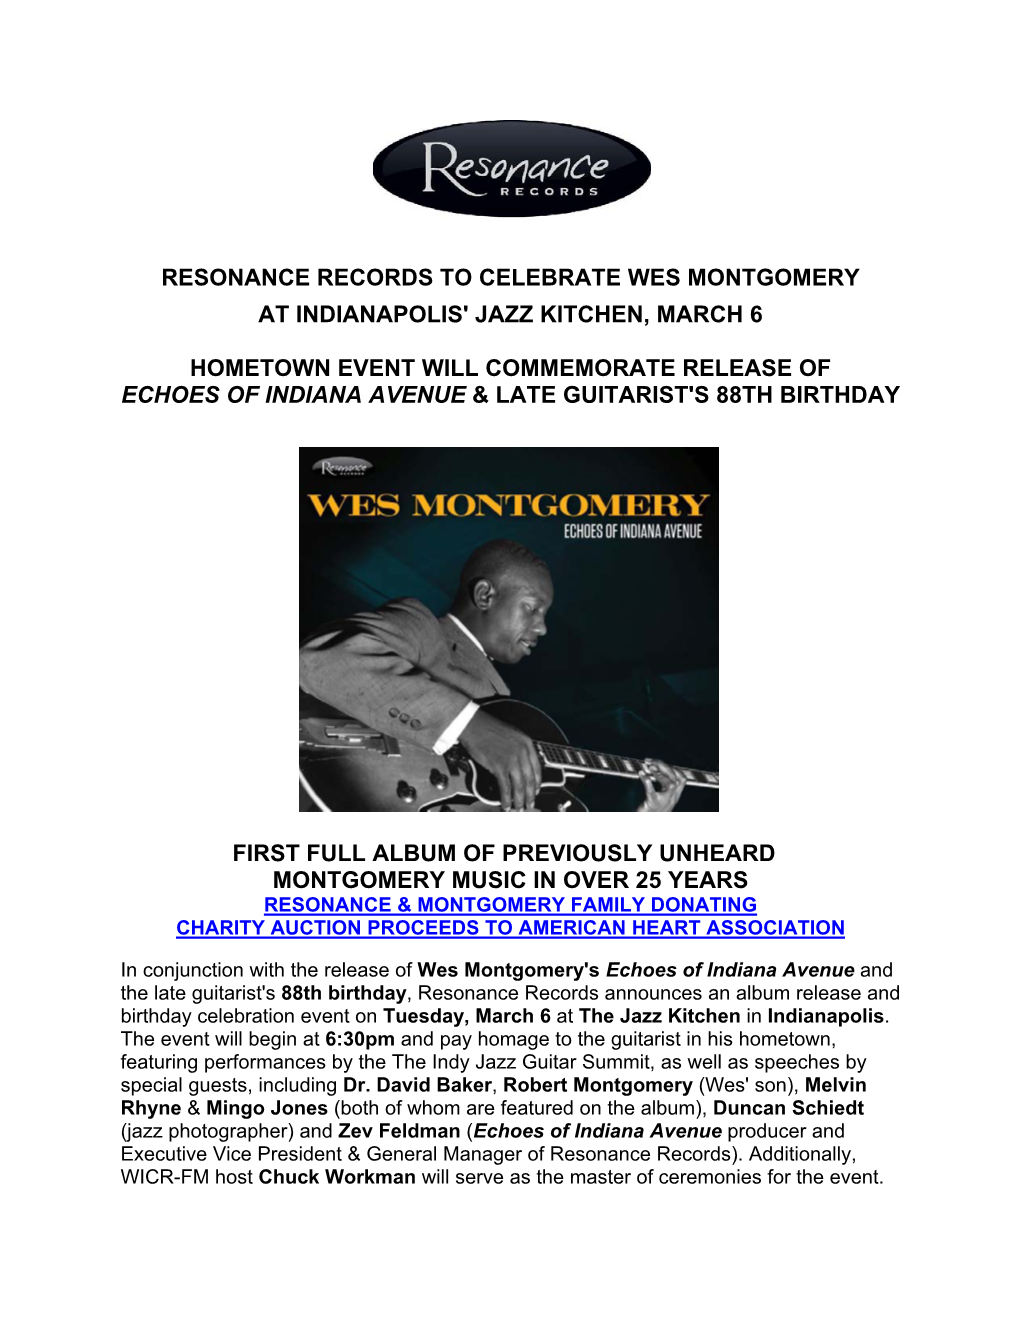 Resonance Records to Celebrate Wes Montgomery at Indianapolis' Jazz Kitchen, March 6